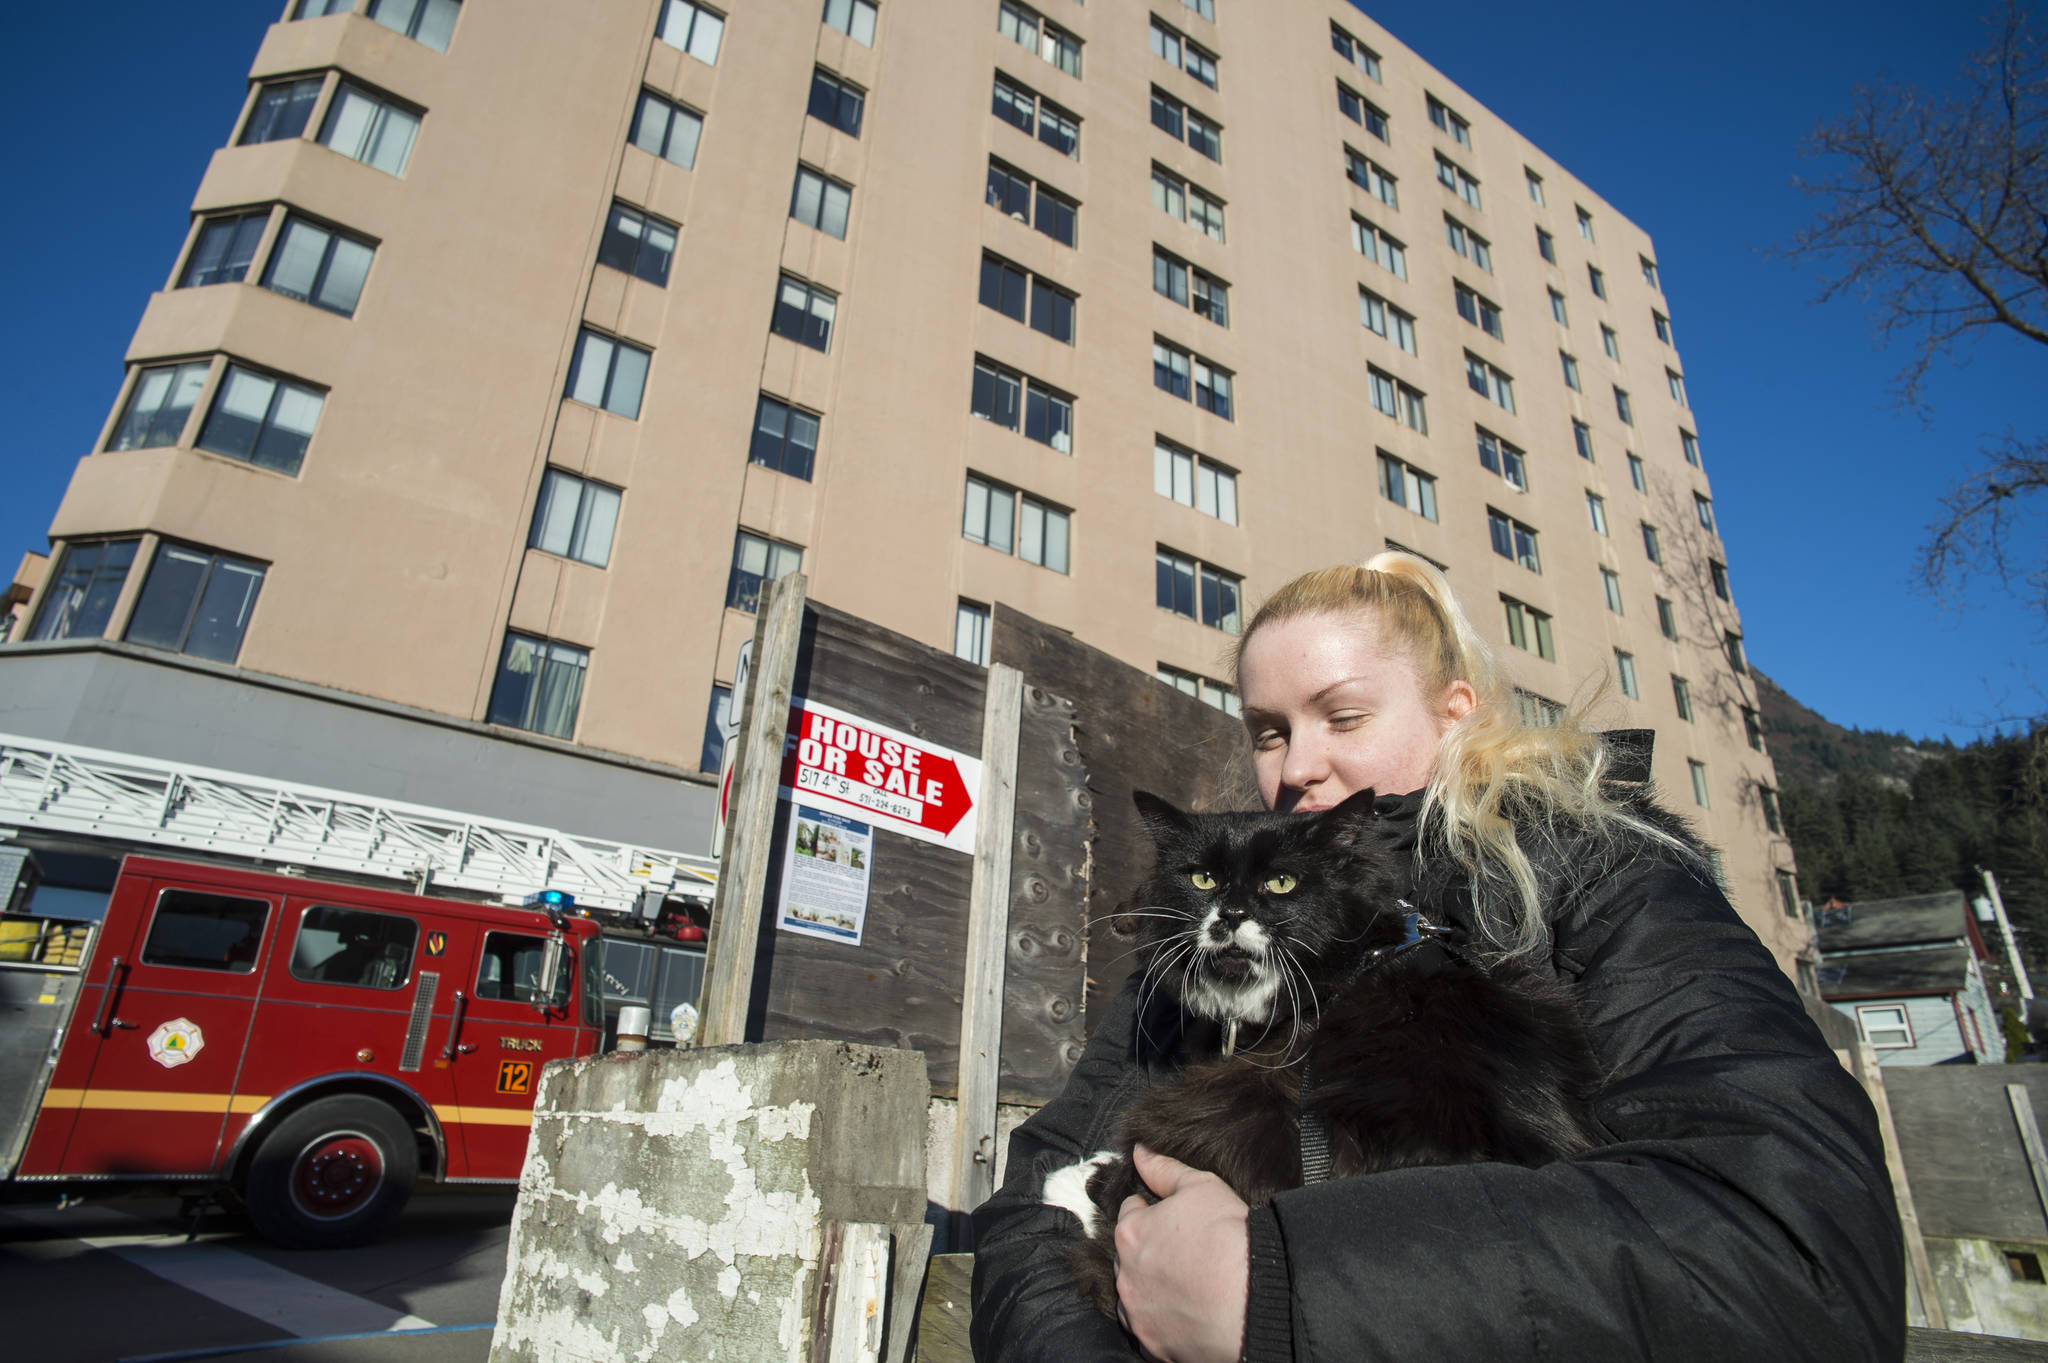 Cassidy Coulter waits outside the Mendenhall Tower Apartments during a fire alarm on Wednesday, Nov. 8, 2017. Work on the building’s boilers set off the alarm. (Michael Penn | Juneau Empire)